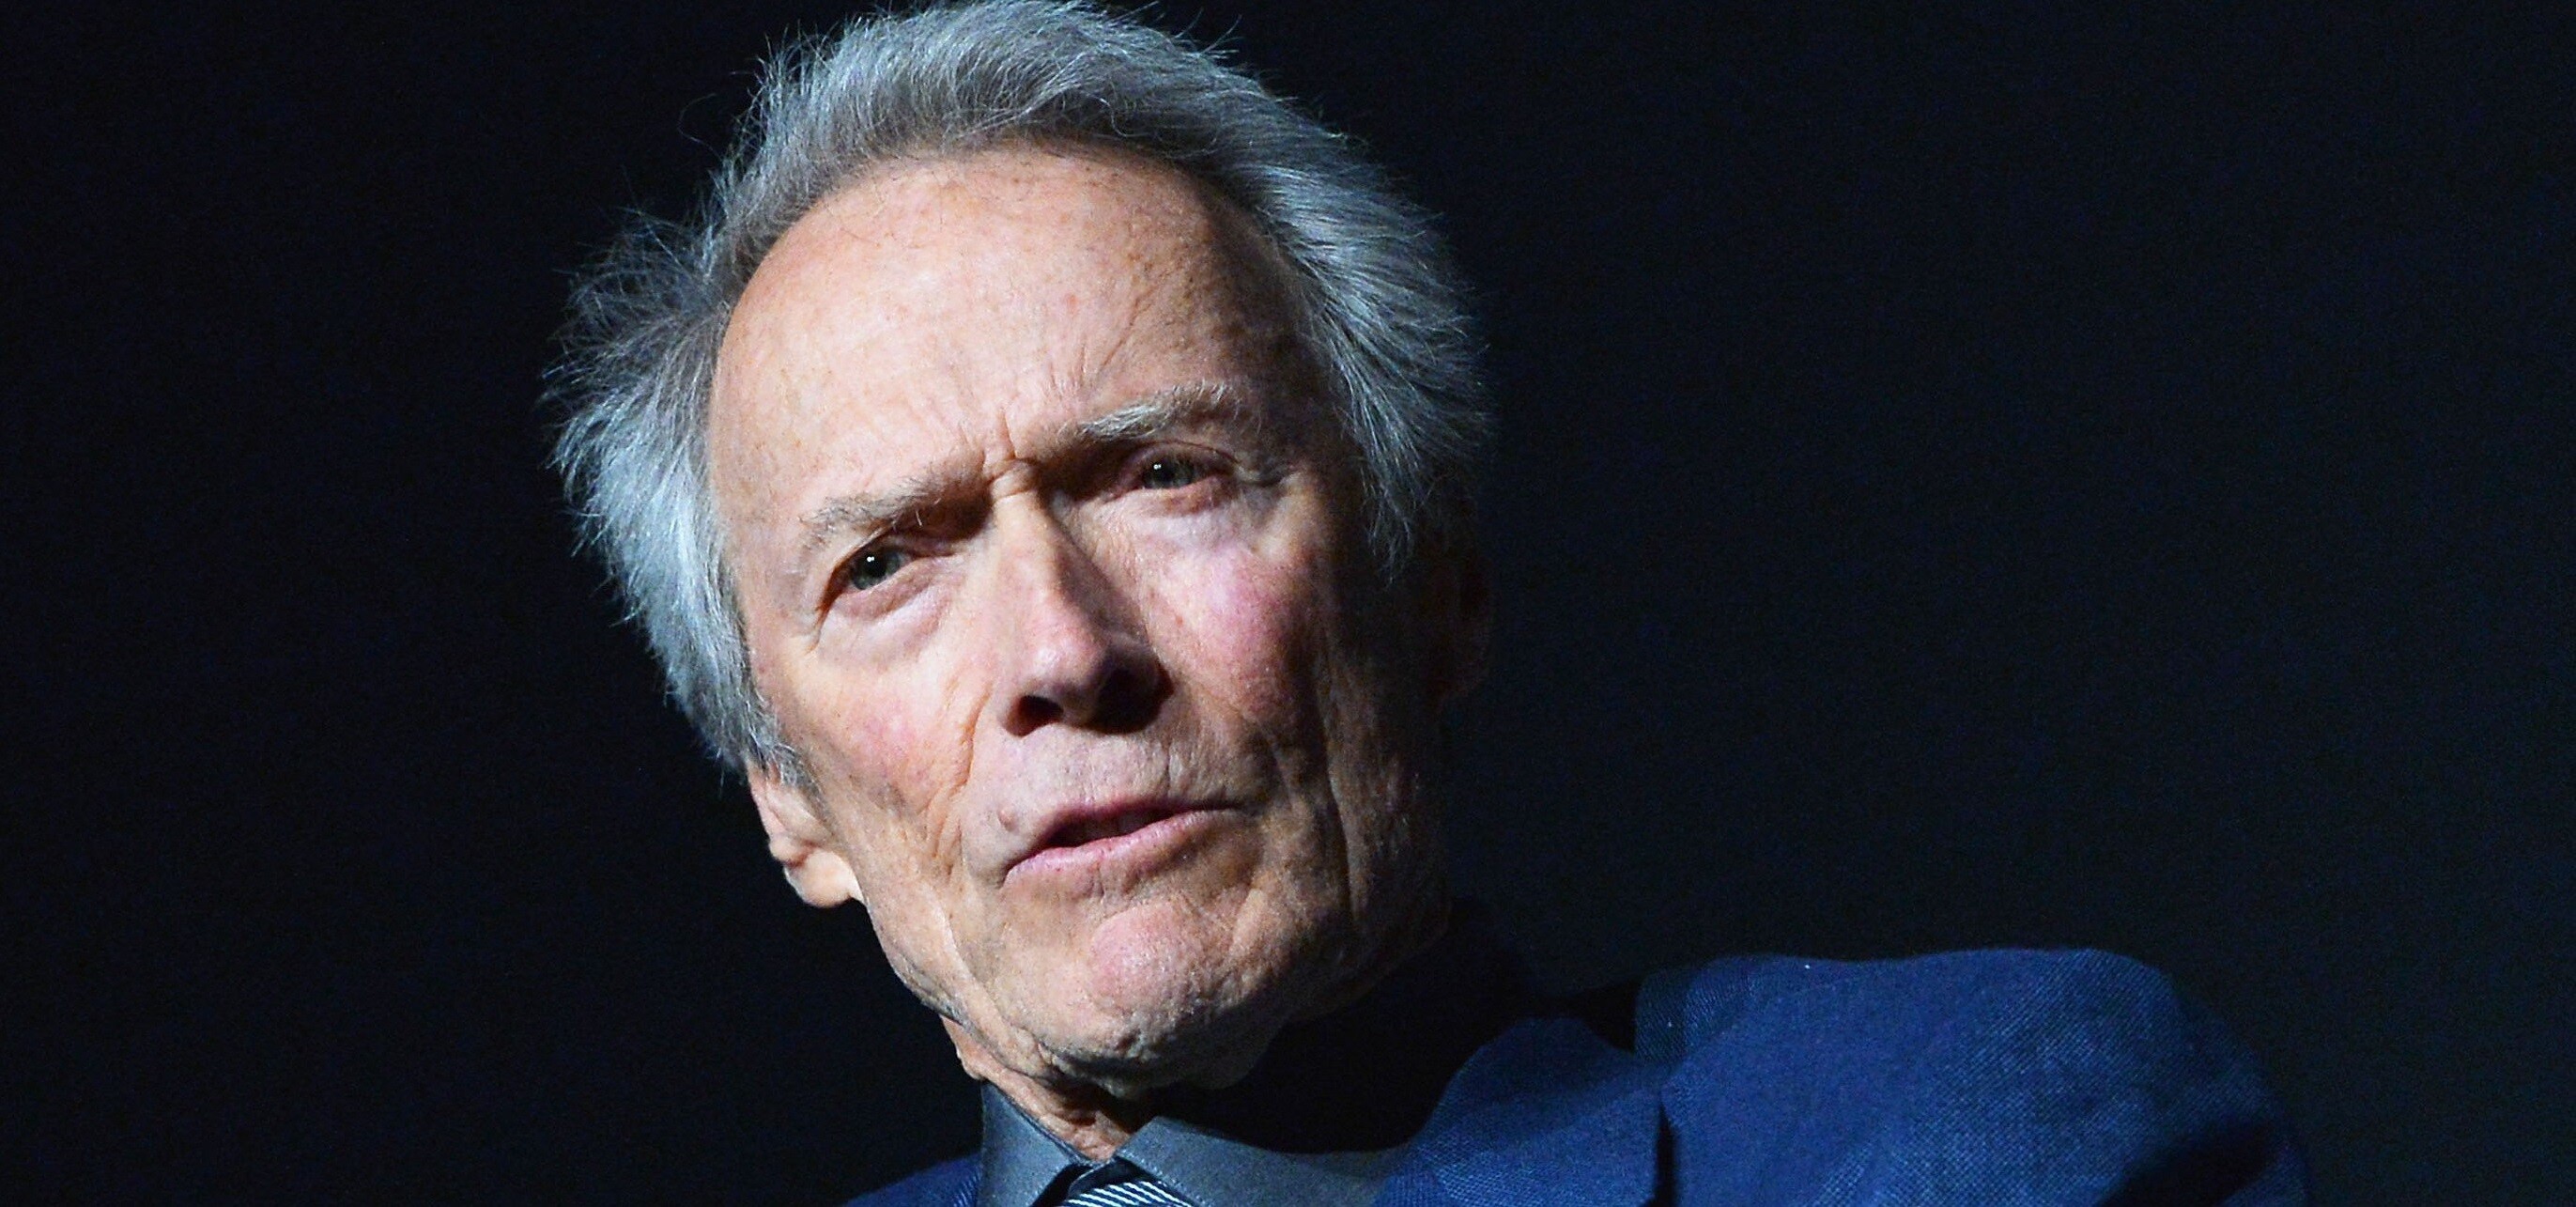 Clint Eastwood: One Of The Most Recognisable Actors Ever, First Movie Success In The Western TV Series "Rawhide". 2750x1290 Dual Screen Wallpaper.